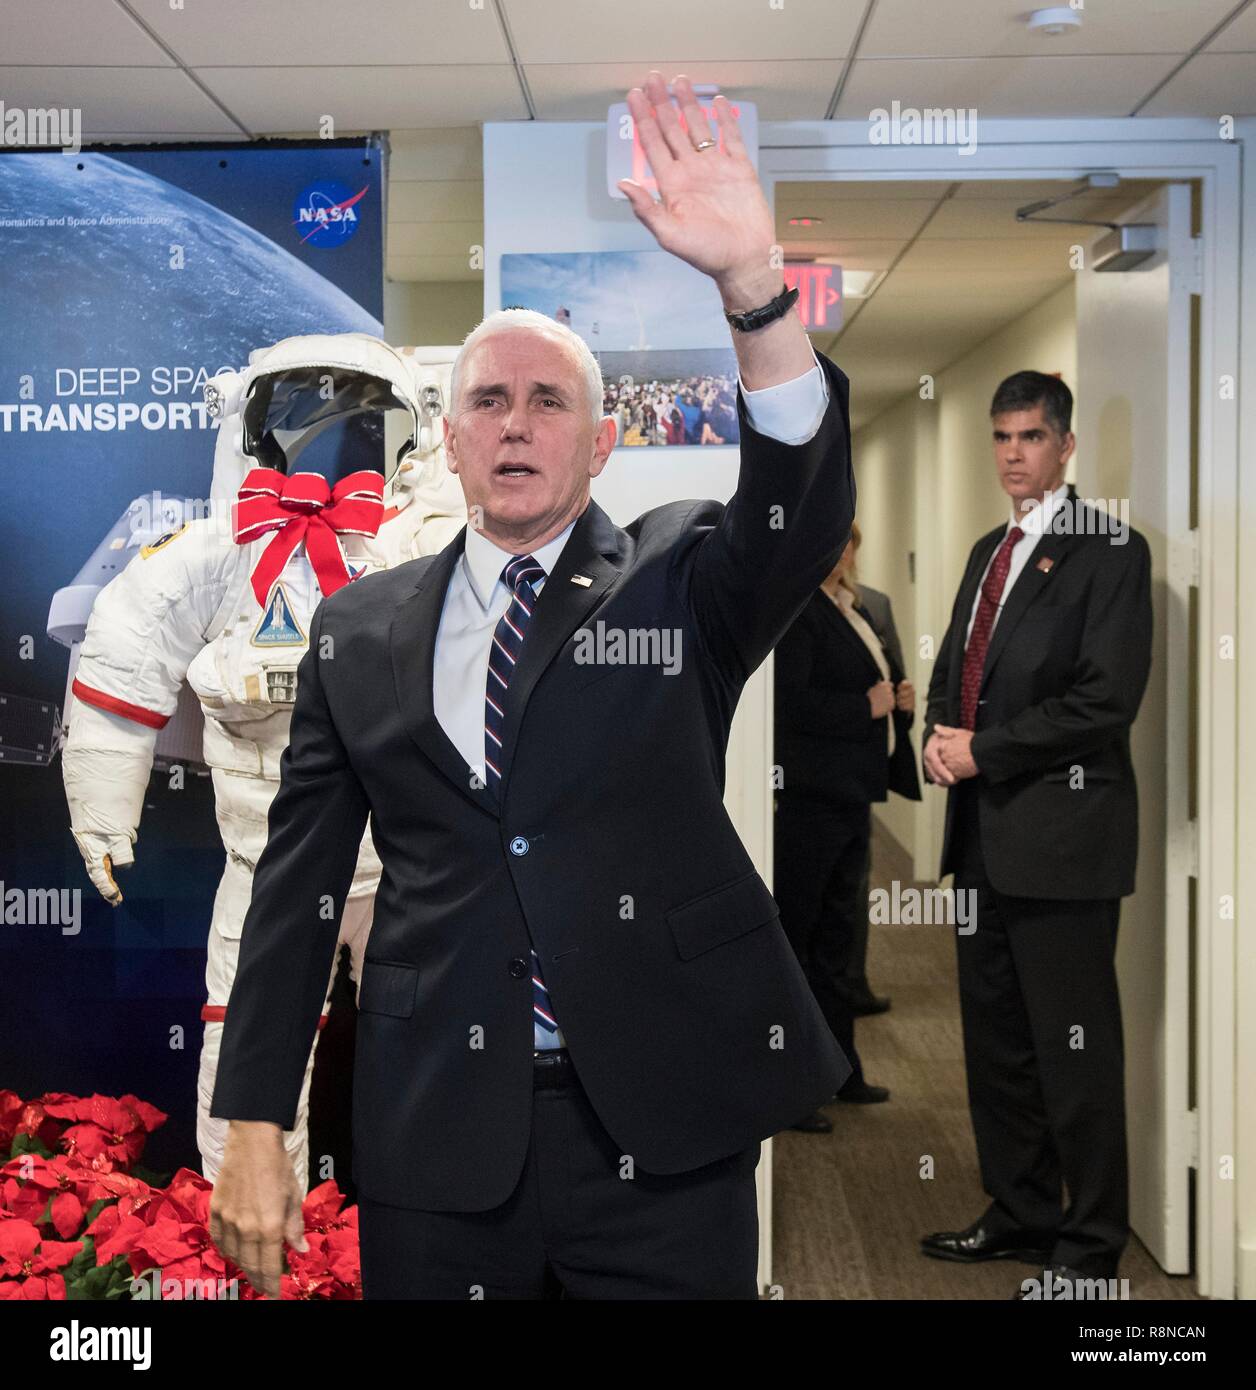 U.S. Vice President Mike Pence waves goodbye to NASA employees following a discussion about the progress on Space Policy Directive 1 at NASA Headquarters December 12, 2018 in Washington, DC. Stock Photo